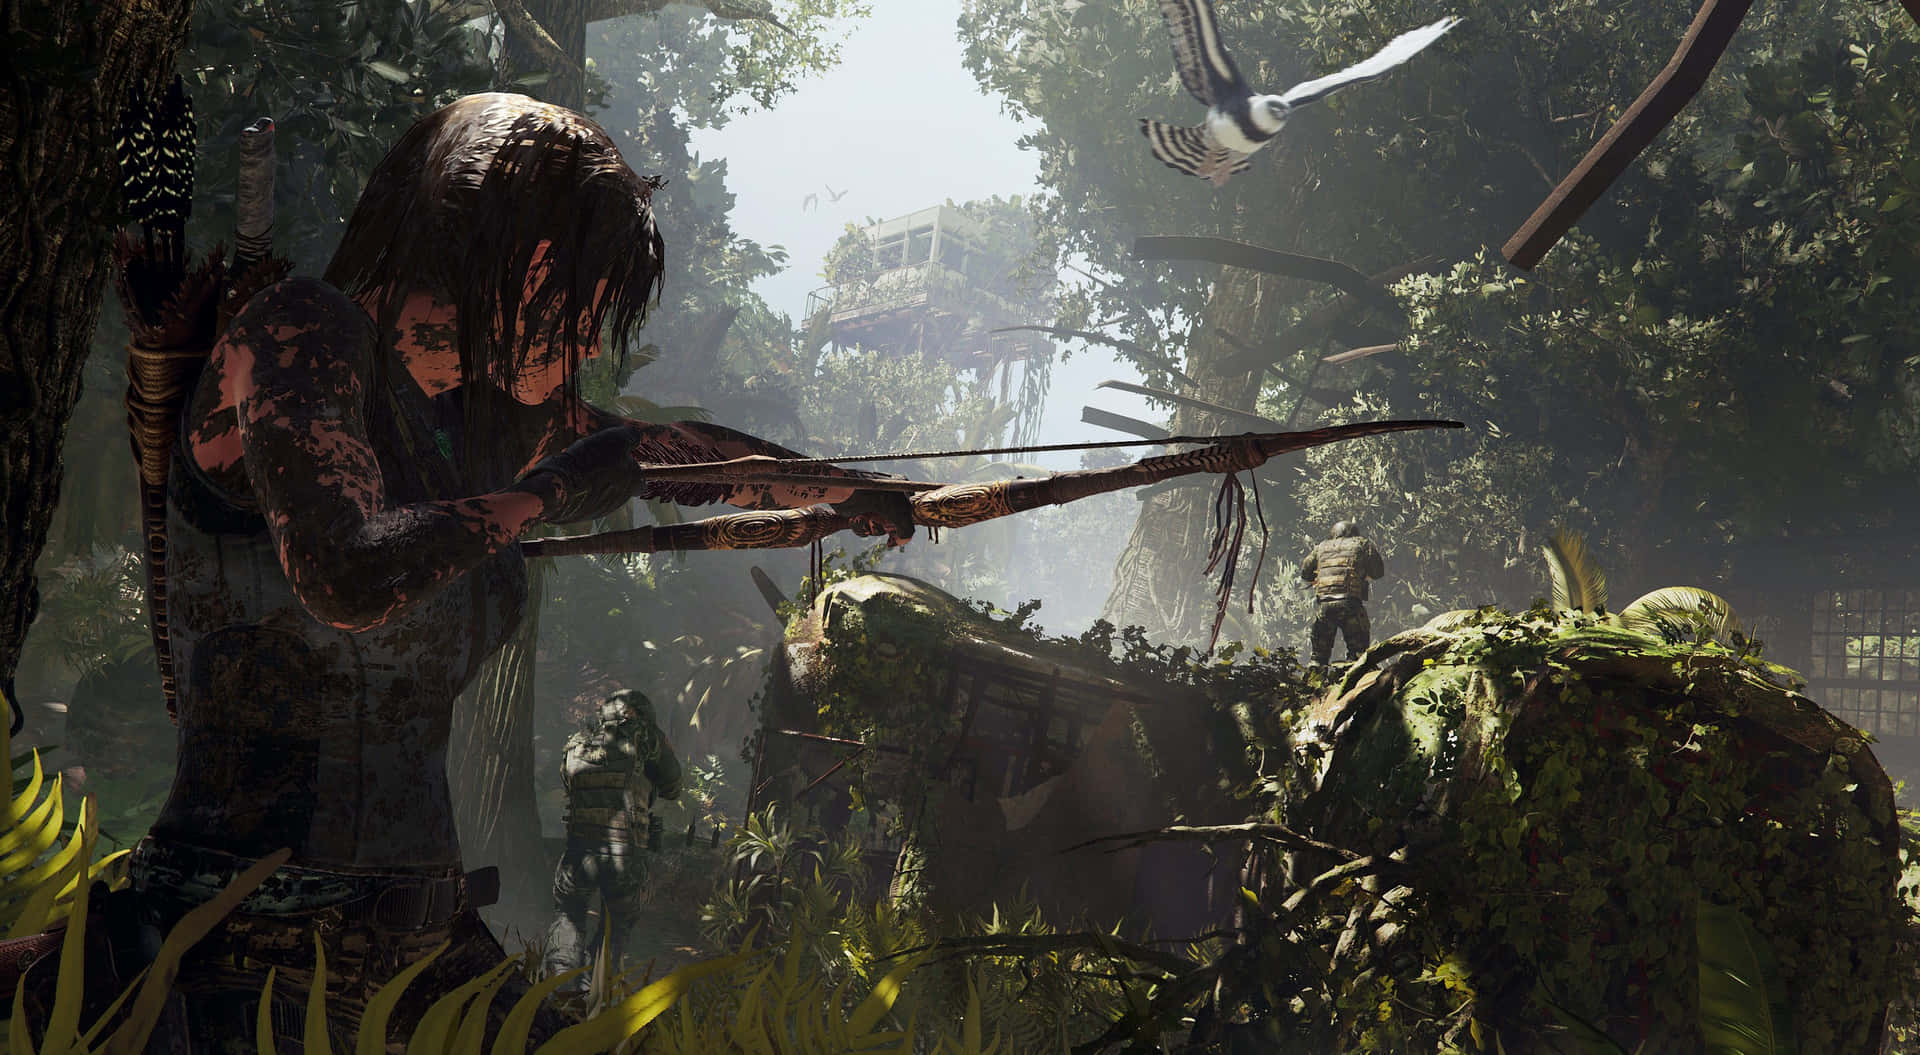 Lara Croft takes action in Shadow of The Tomb Raider Wallpaper